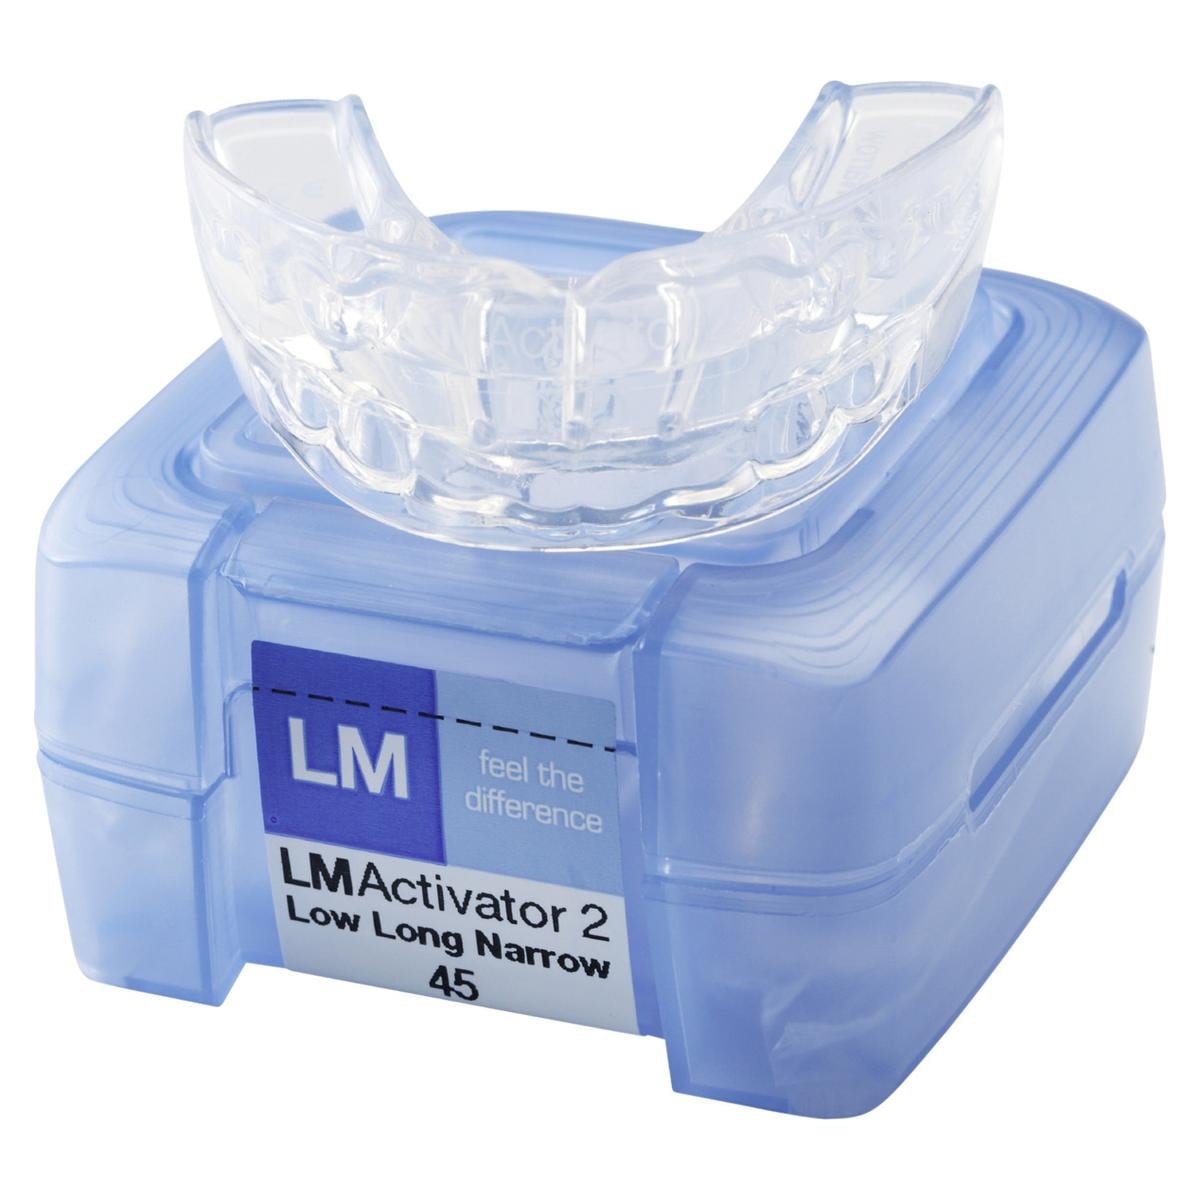 LM Activator 2 Low Long - Narrow - Size 70 (94270LLN)